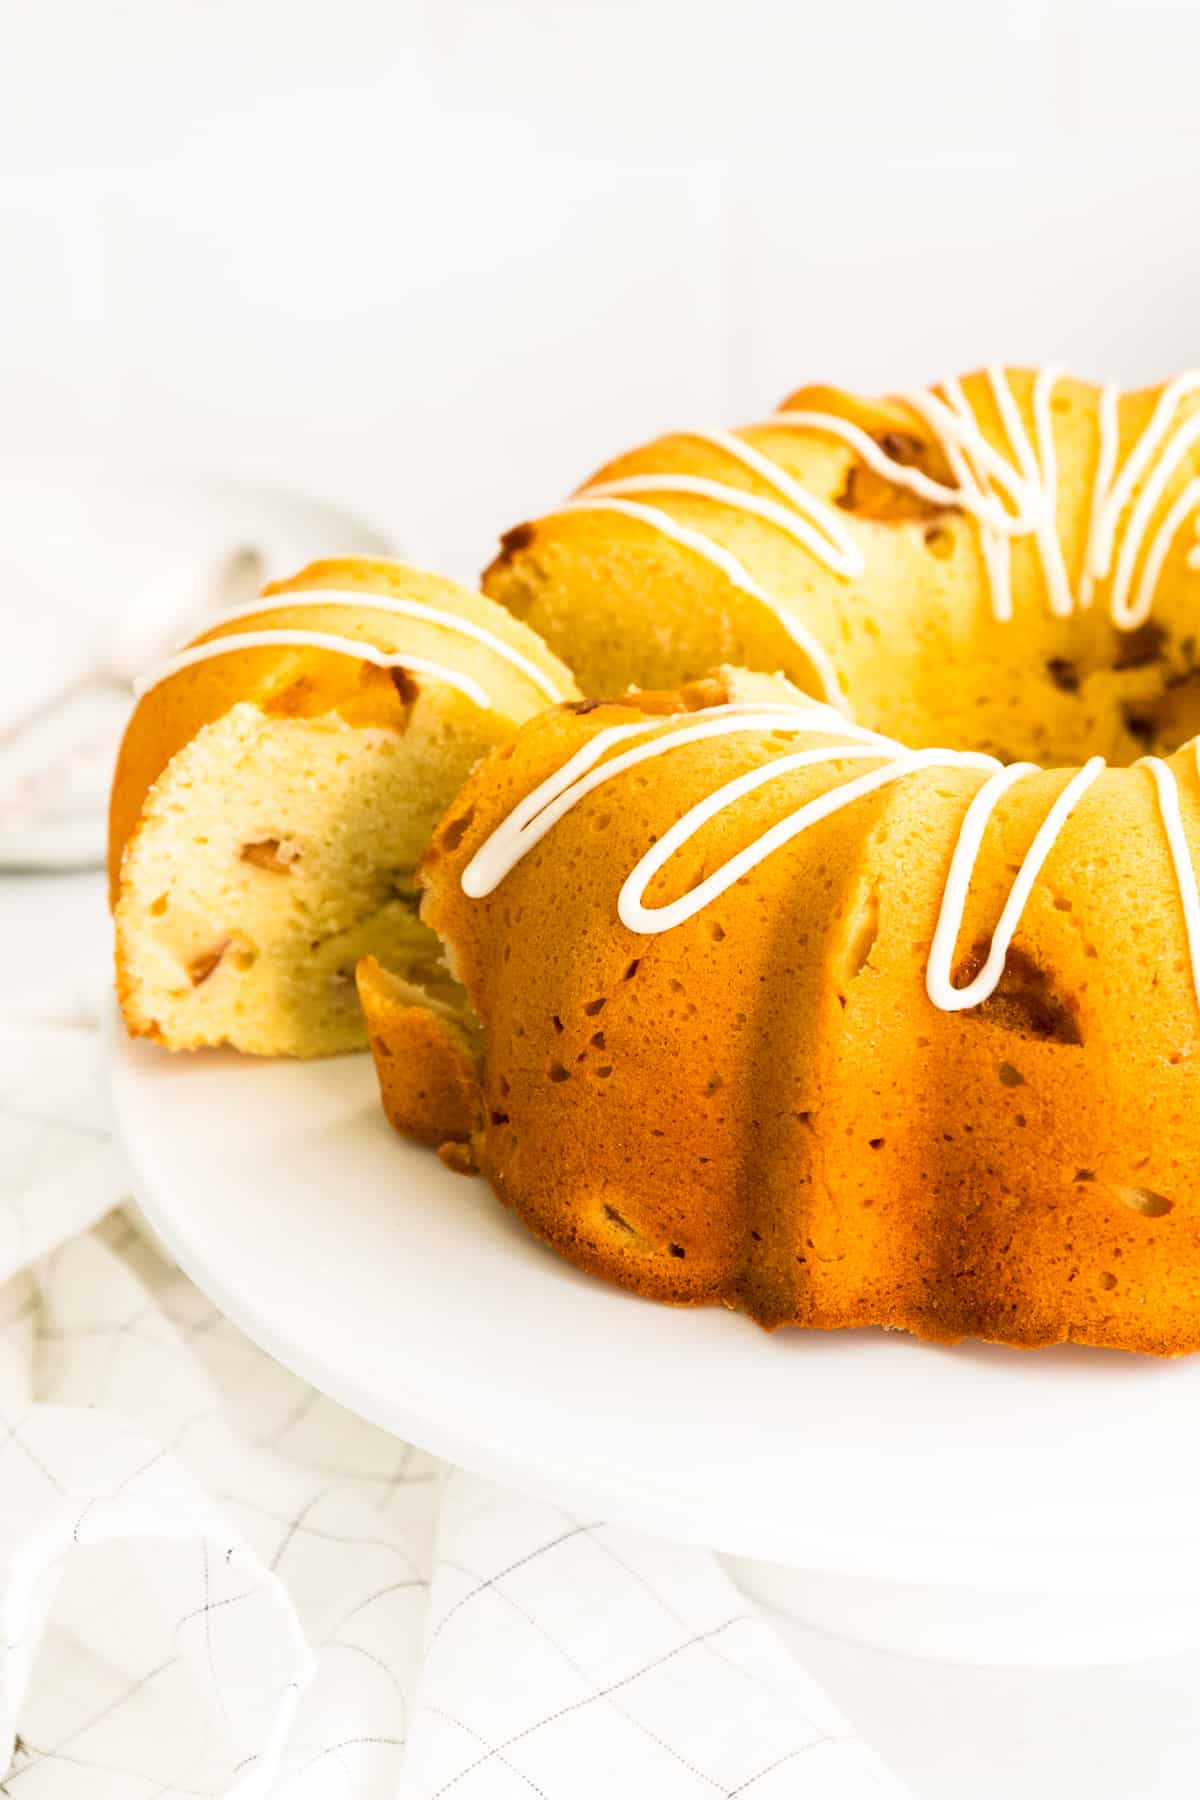 Golden brown bundt cake filled with chunks of fresh peaches and topped with drizzle of icing. A slice is being removed with cake server.